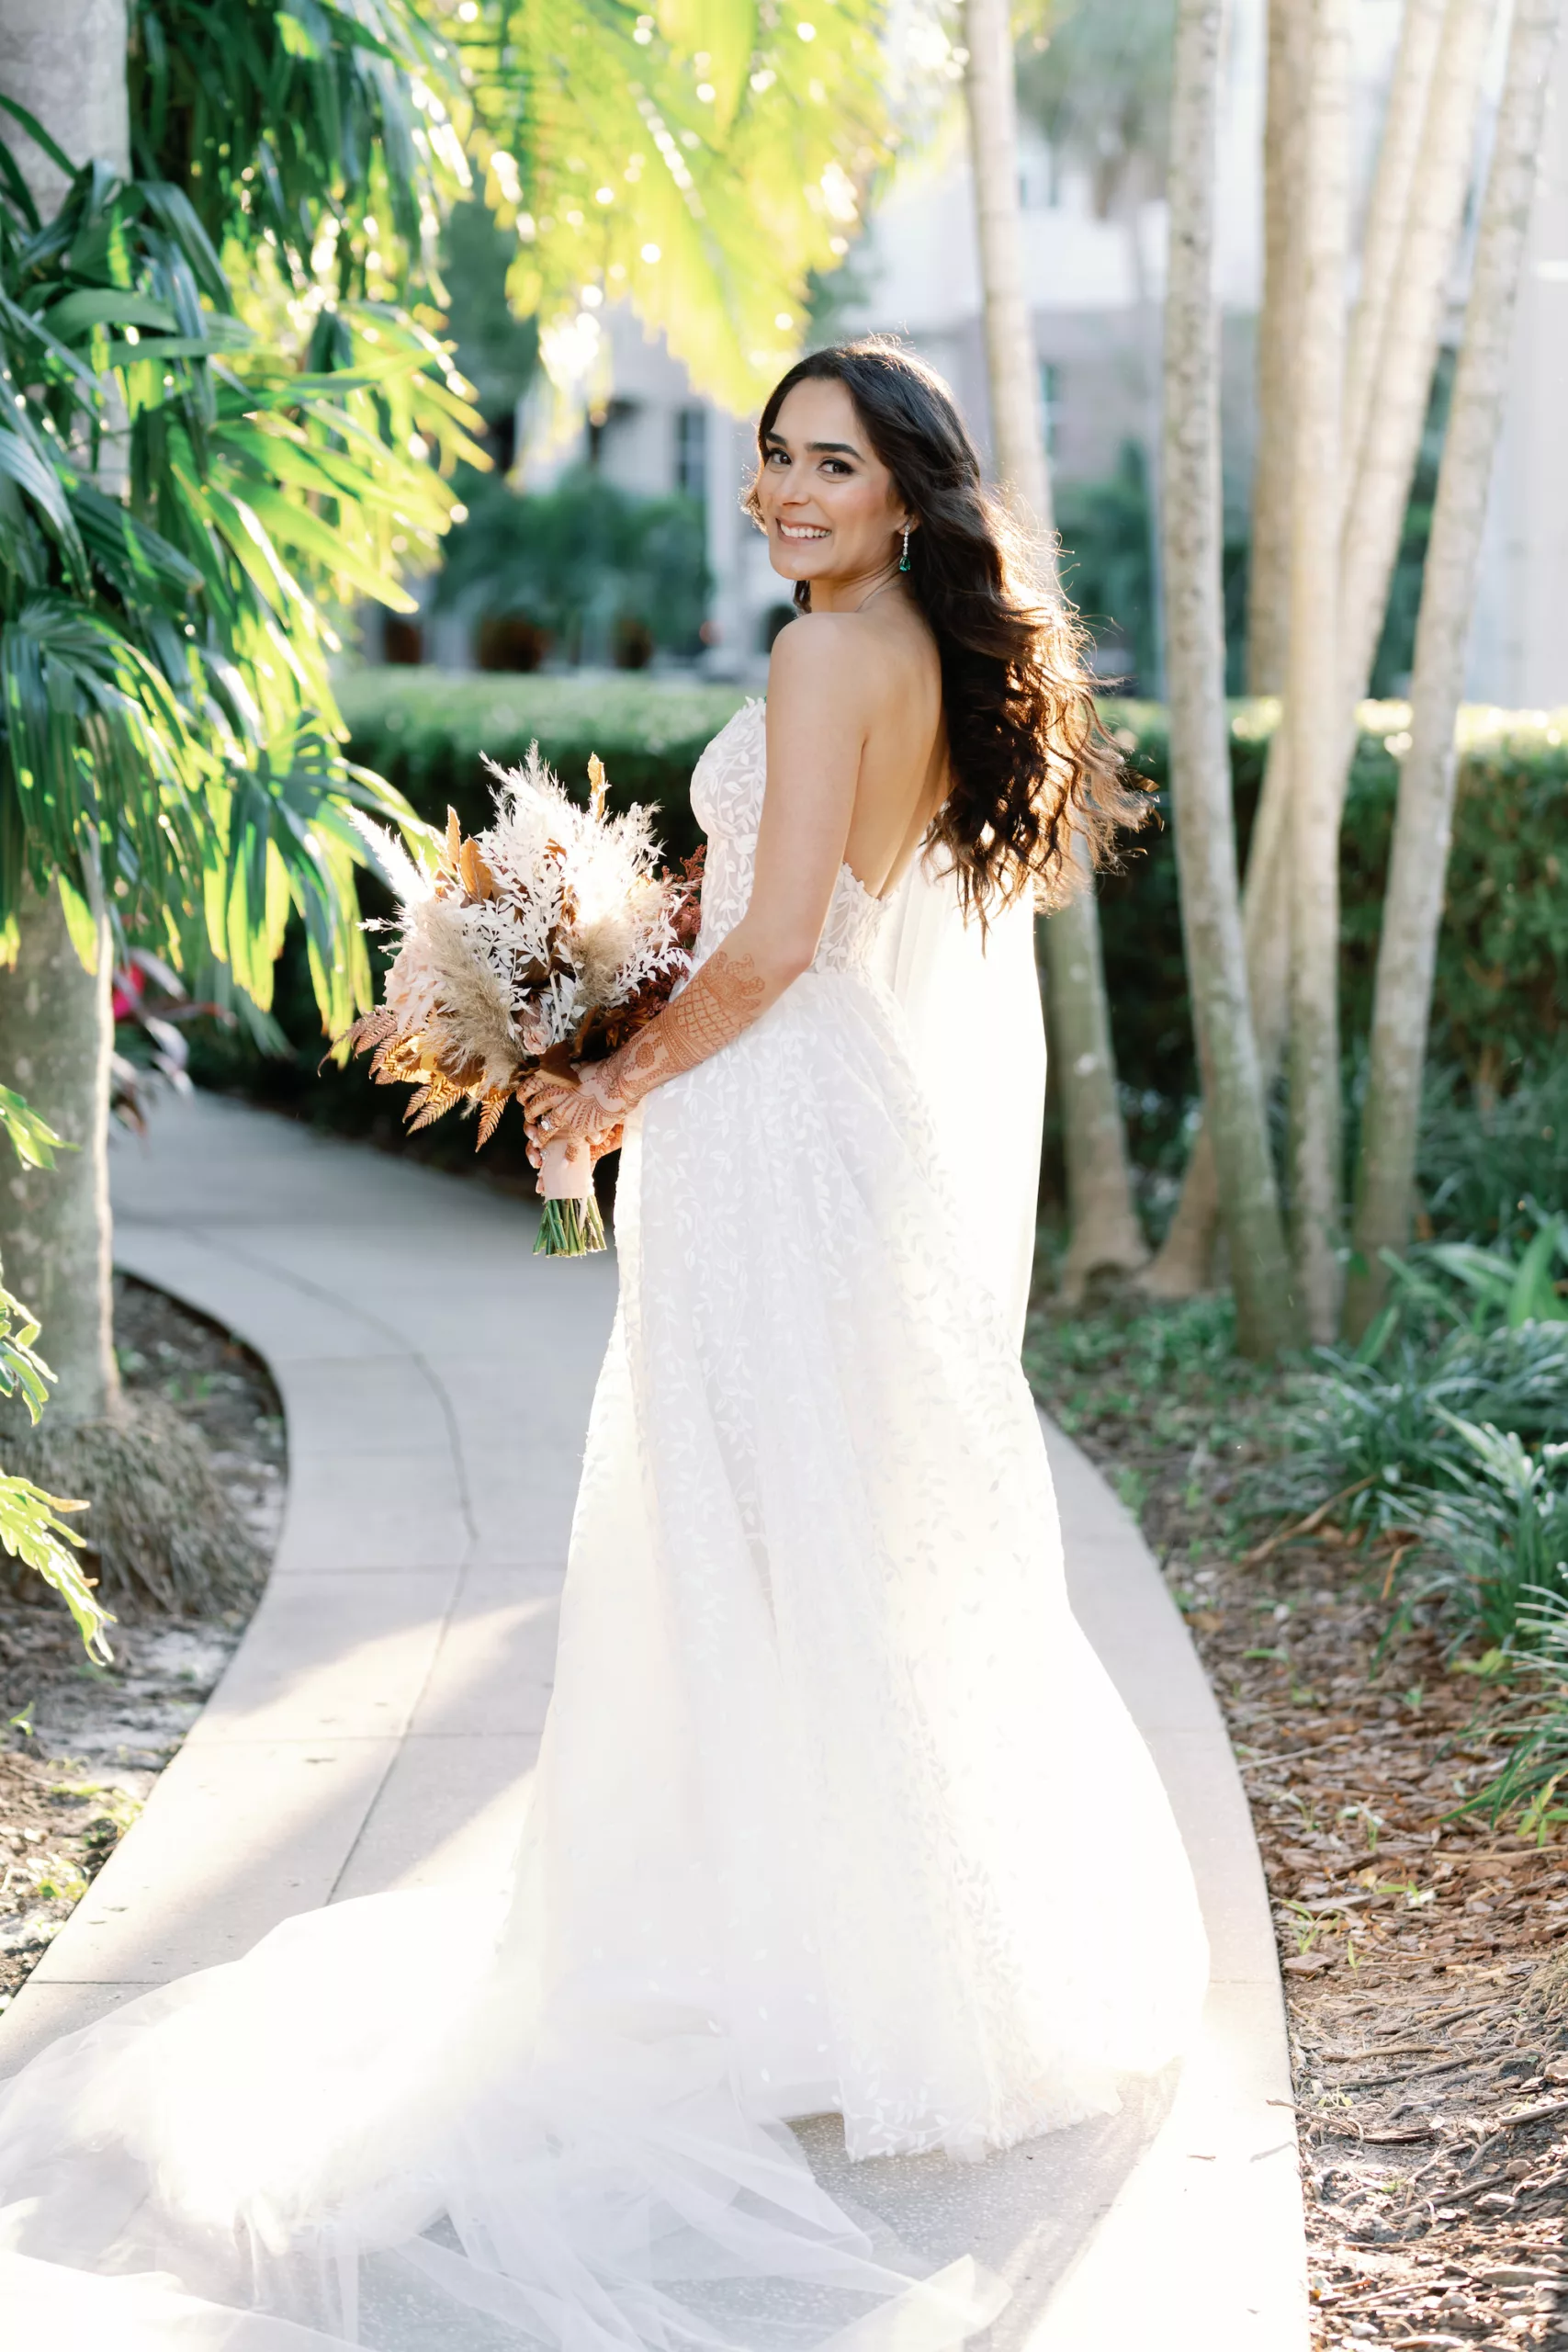 White Strapless Lace A Line Verdin Bridal Wedding Dress Ideas | Simple Hair and Makeup Inspiration | Tampa Hair and Makeup Artist Michele Renee The Studio